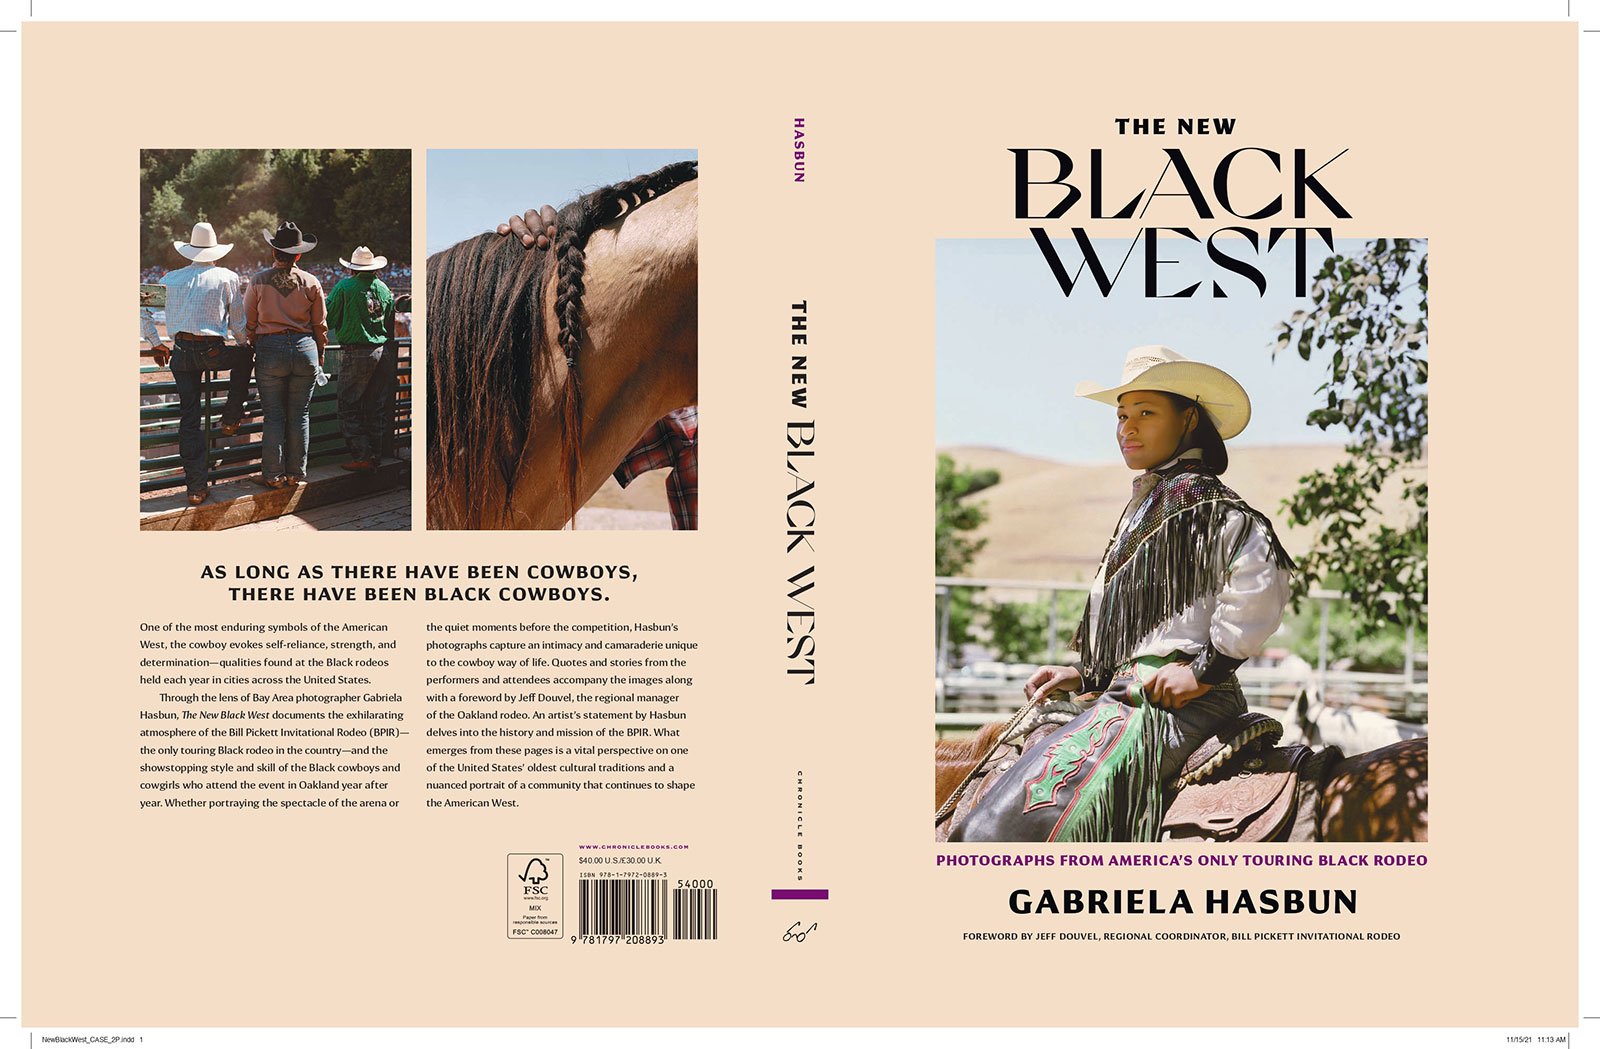 The New Black West book cover